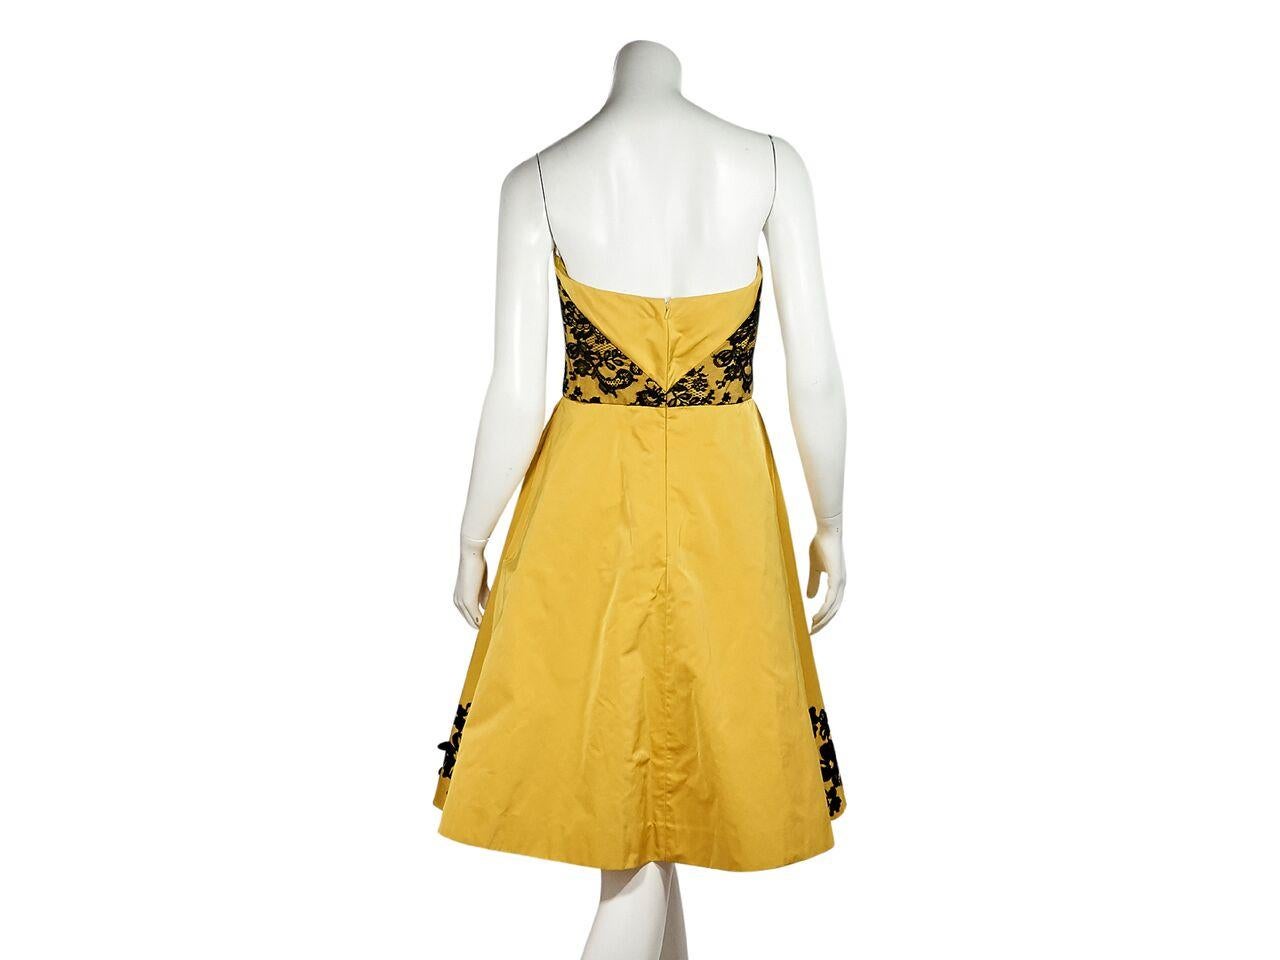 Product details:  Yellow strapless cocktail dress by Oscar de la Renta.  From the 2016 Resort collection.  Accented with black beaded lace.  Sweetheart neckline.  Inset boning for support.  Concealed back zip closure.  31